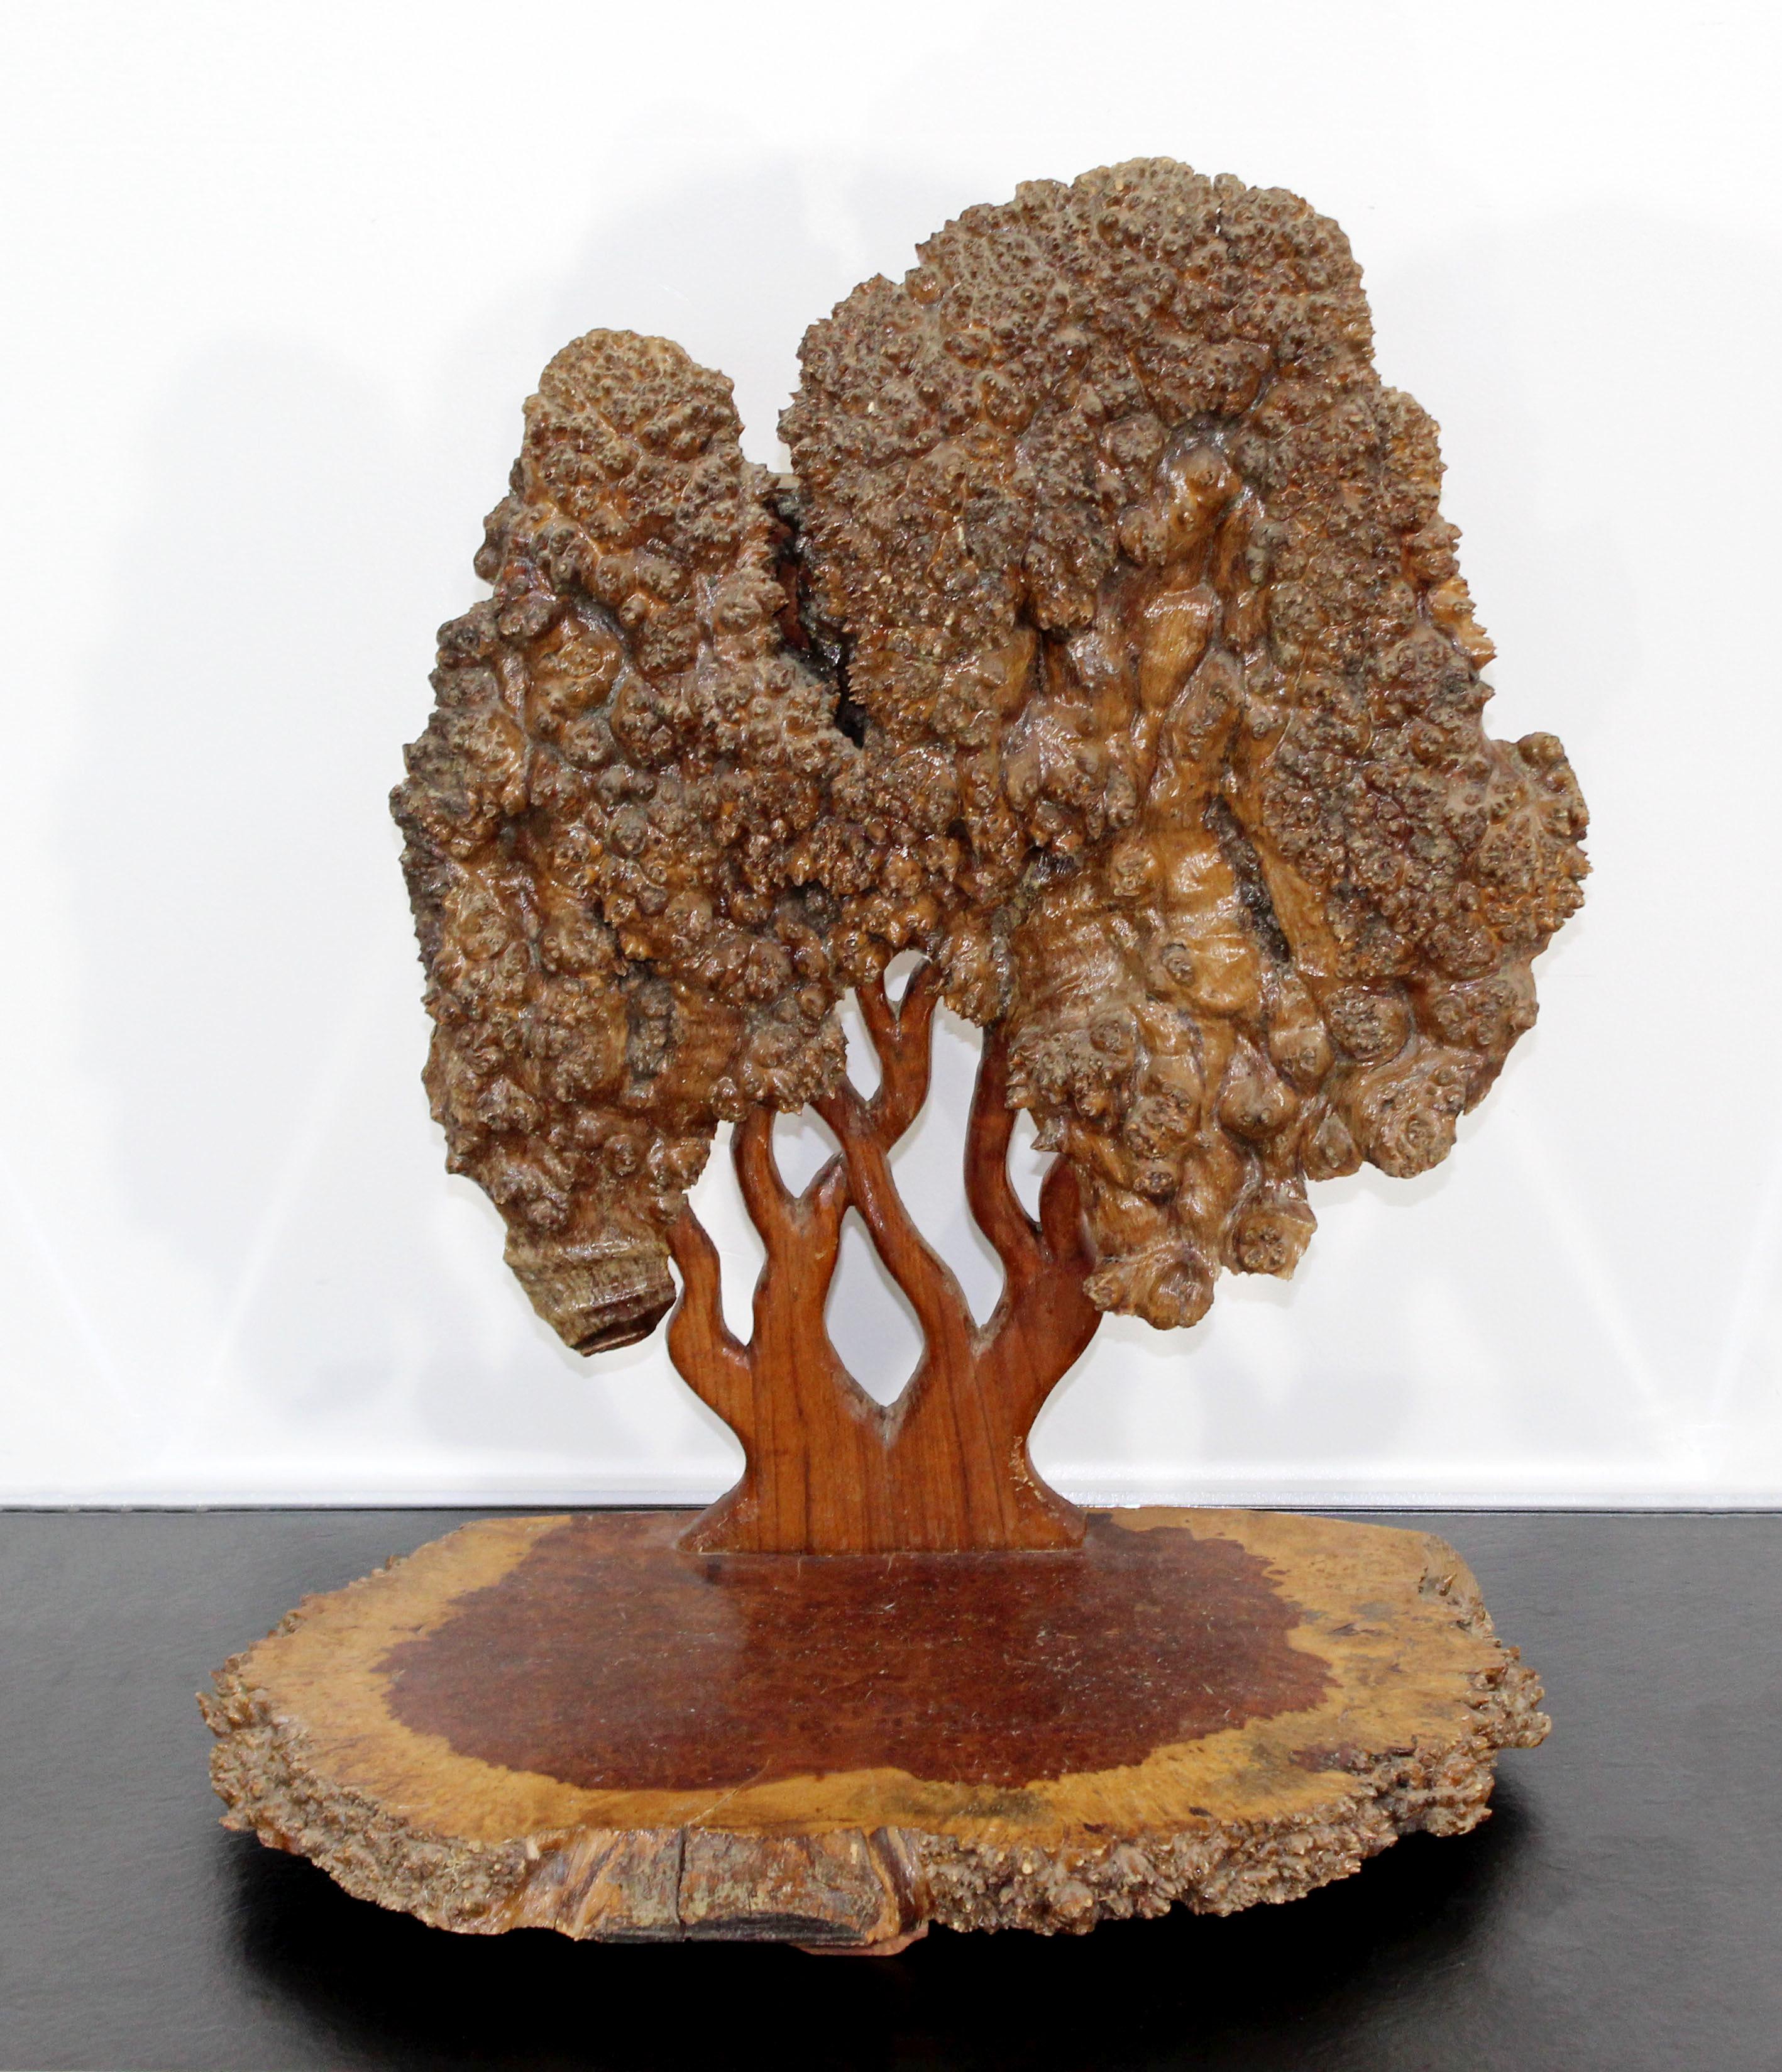 For your consideration is a textured wooden, studio made table sculpture of the Tree of Life. In excellent condition. The dimensions are 21.5